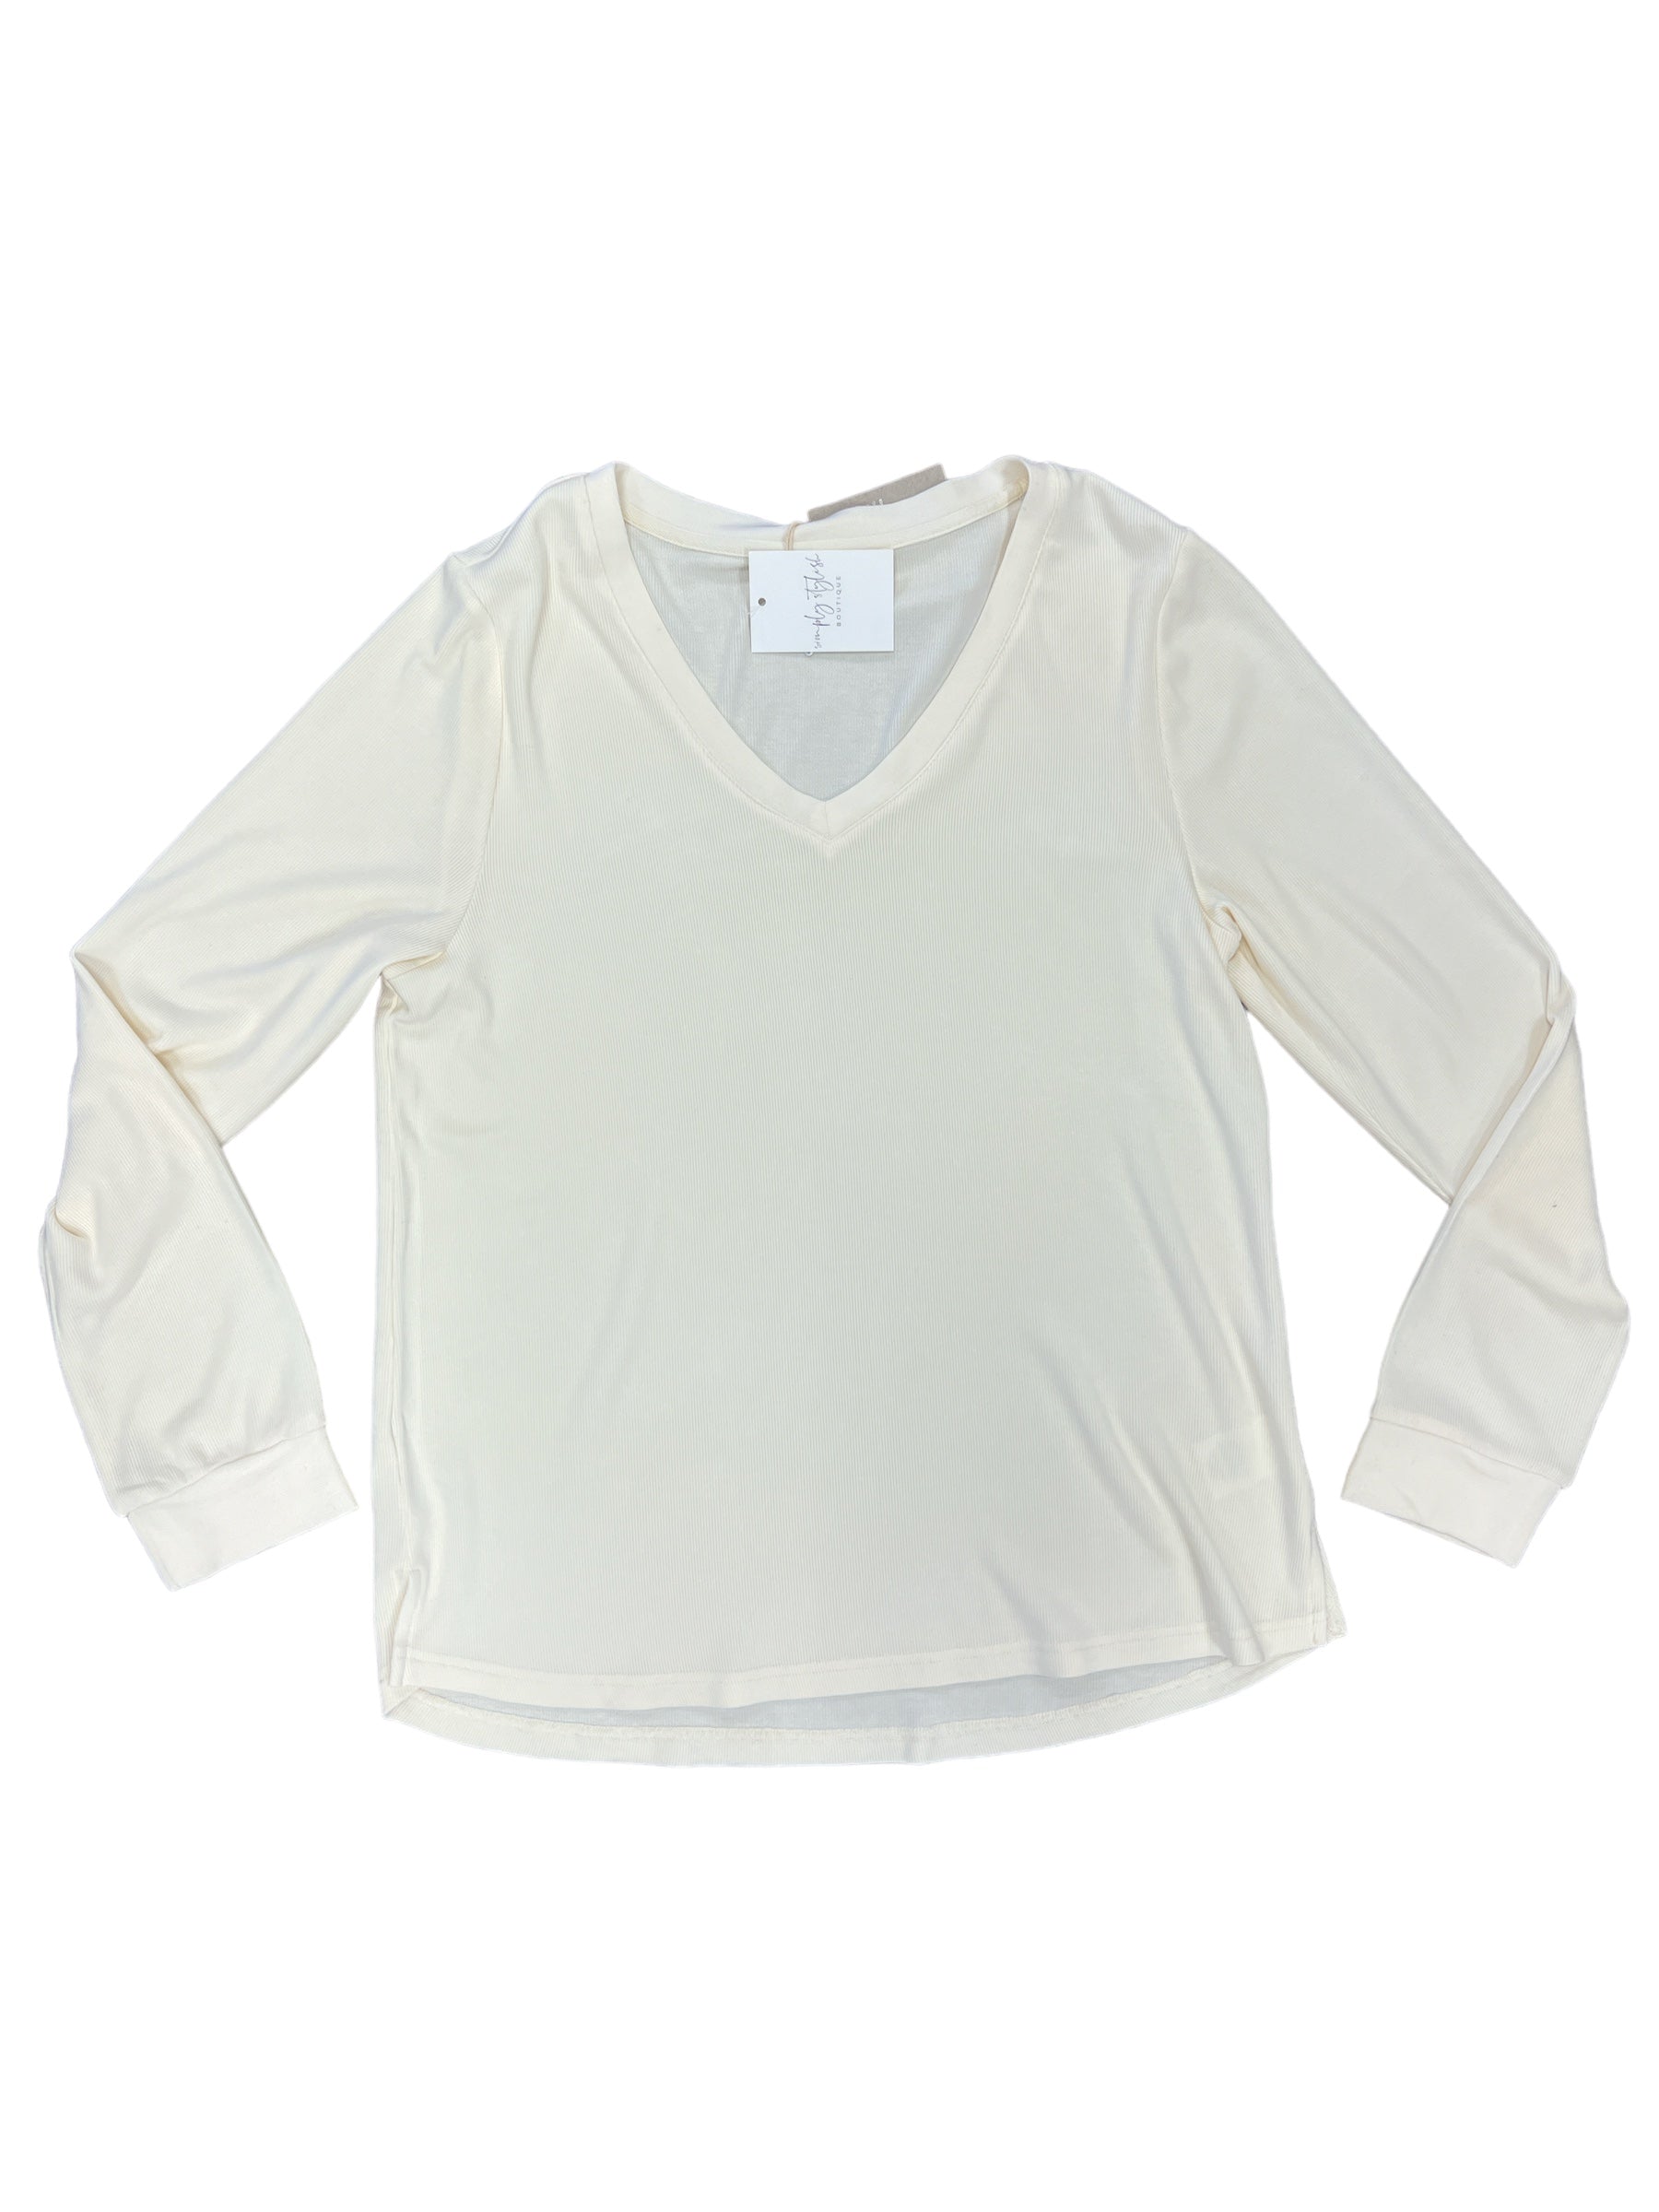 Shannon Top-120 Casual Tops & Tees-Simply Stylish Boutique-Simply Stylish Boutique | Women’s & Kid’s Fashion | Paducah, KY